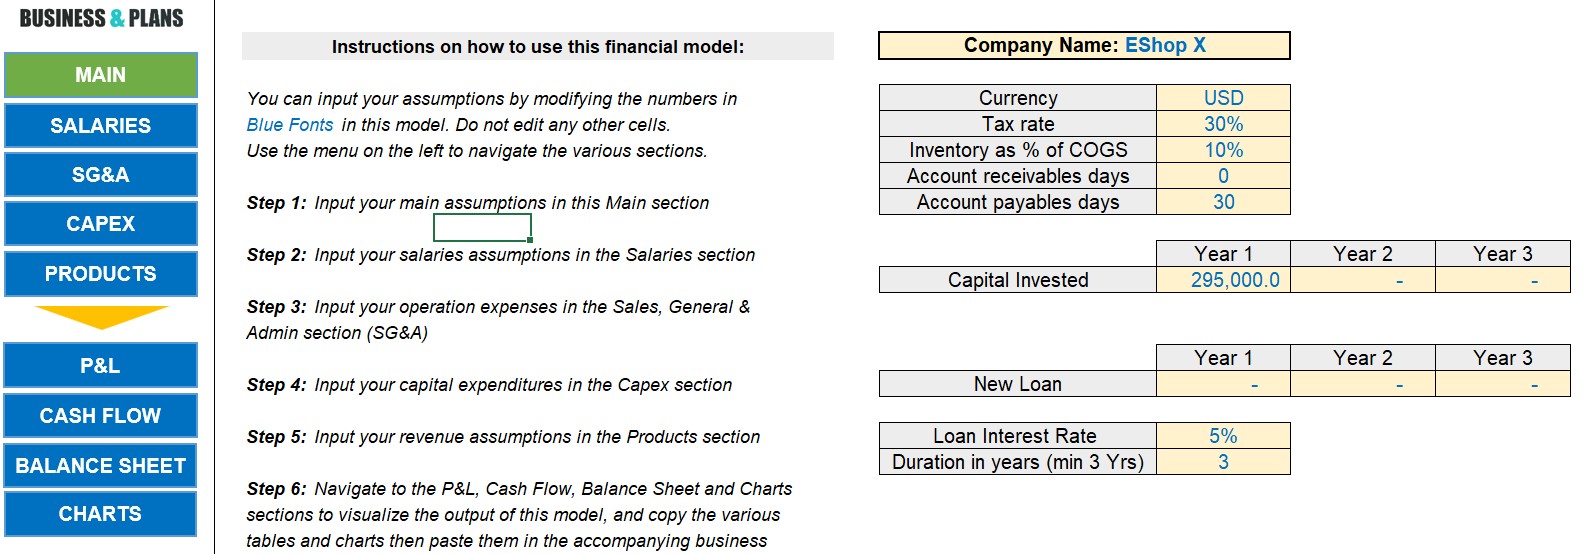 E-commerce financial plan in Excel